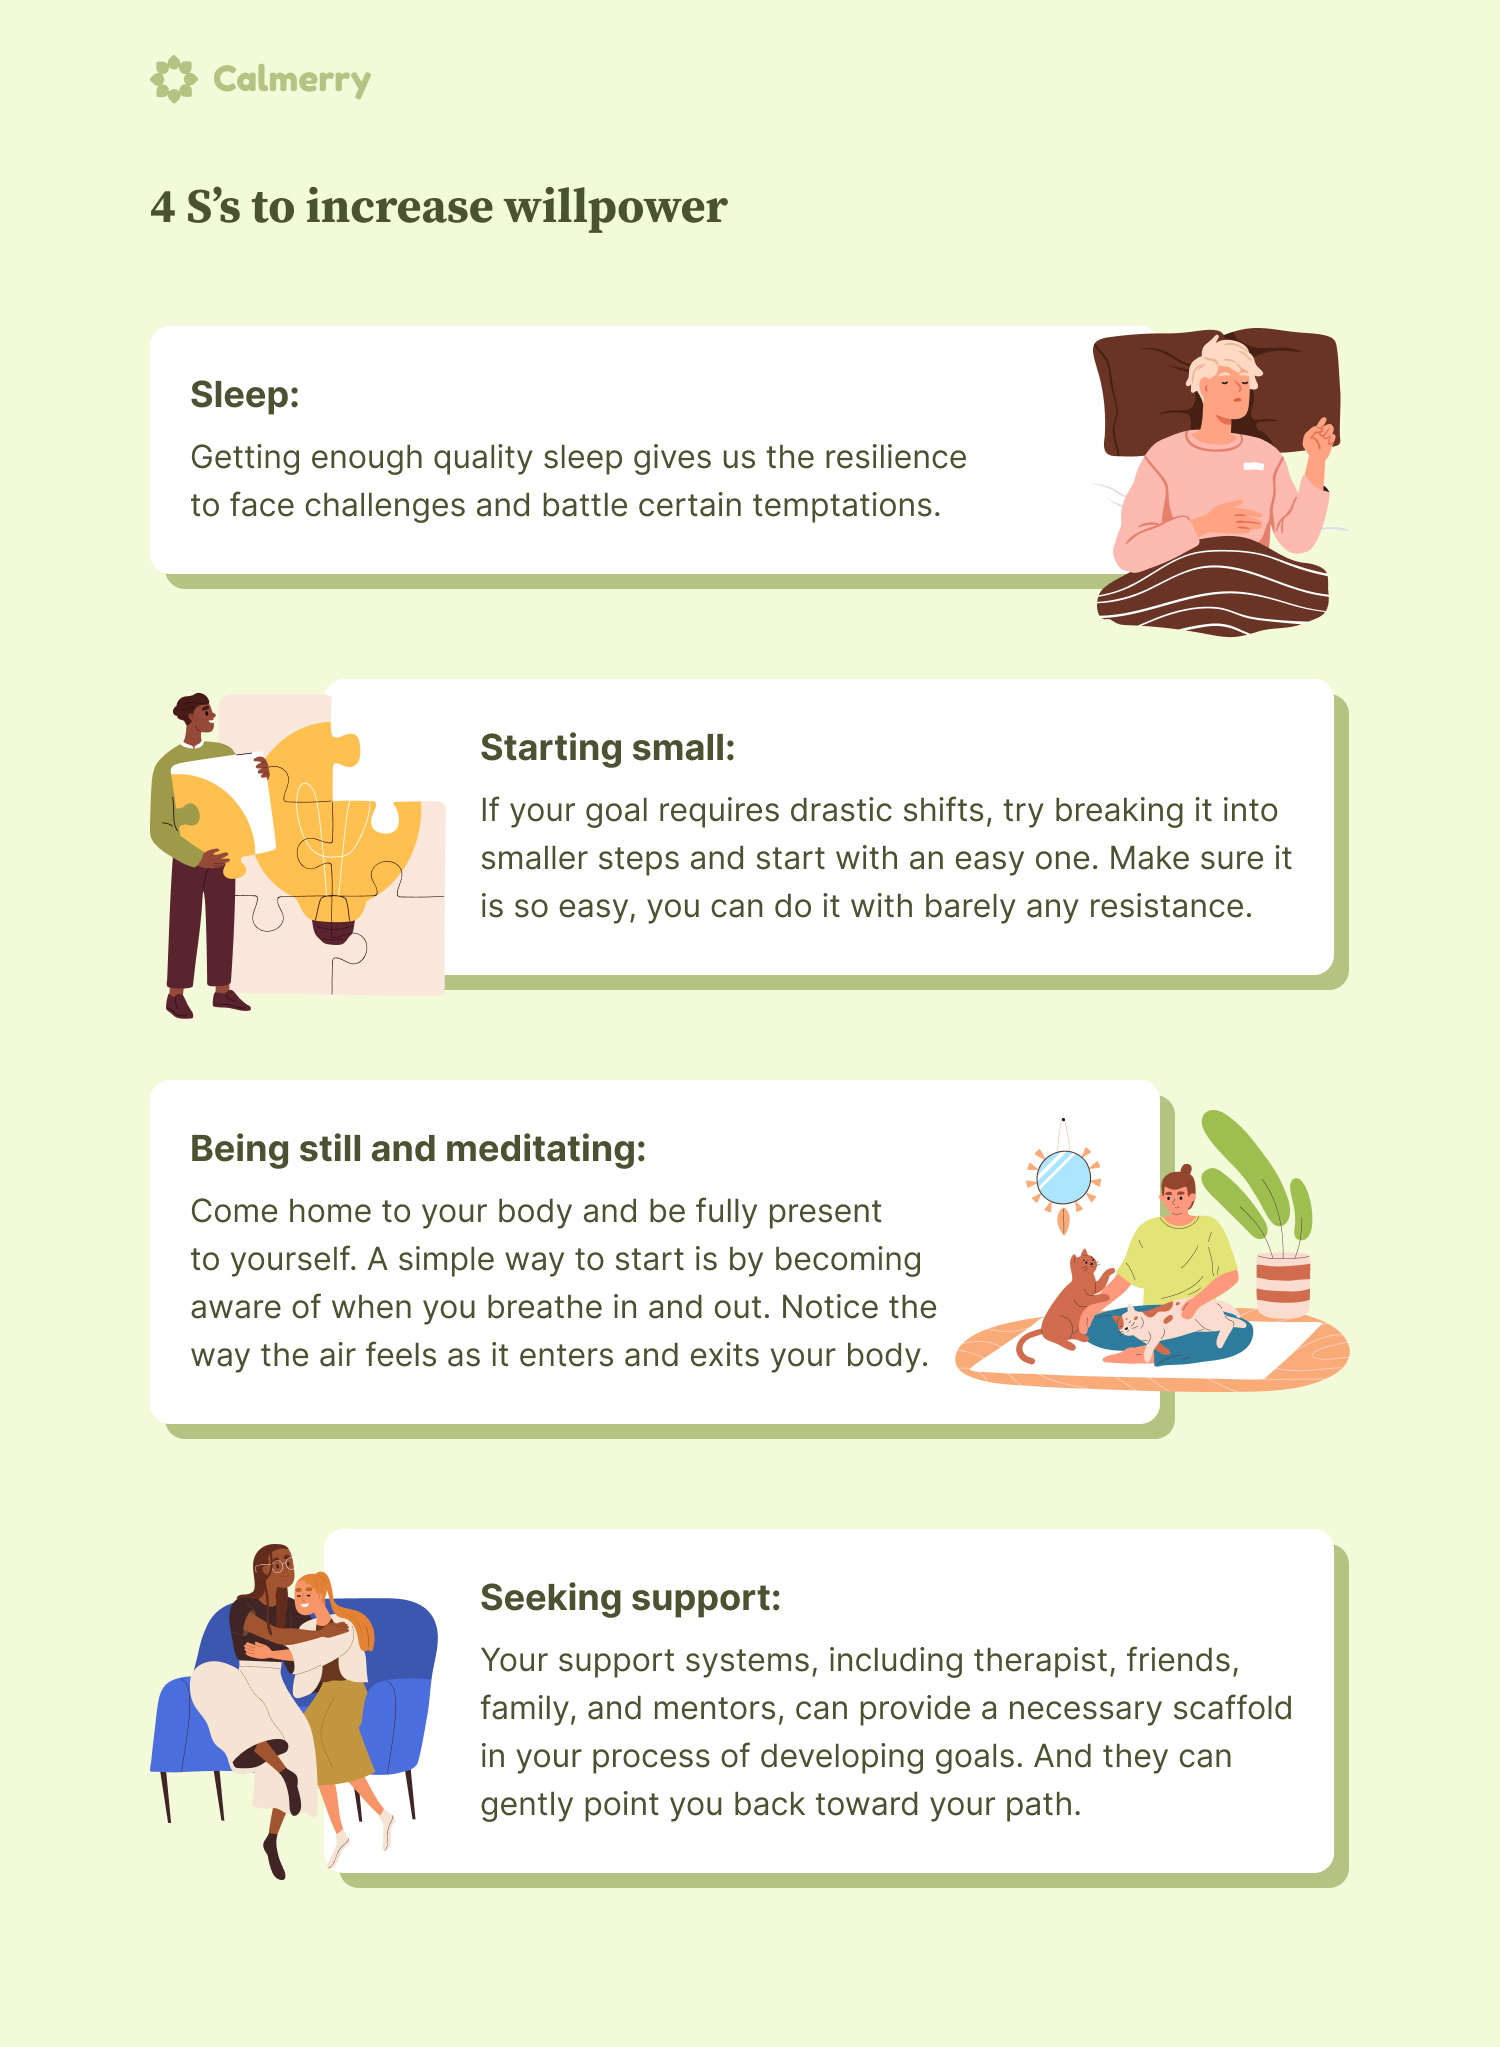 4 S’s to increase willpower Sleep: Getting enough quality sleep gives us the resilience to face challenges and battle certain temptations. Starting small: If your goal requires drastic shifts, try breaking it into smaller steps and start with an easy one. Make sure it is so easy, you can do it with barely any resistance. Being still and meditating: Come home to your body and be fully present to yourself. A simple way to start is by becoming aware of when you breathe in and out. Notice the way the air feels as it enters and exits your body. Seeking support: Your support systems, including therapist, friends, family, and mentors, can provide a necessary scaffold in your process of developing goals. And they can gently point you back toward your path.